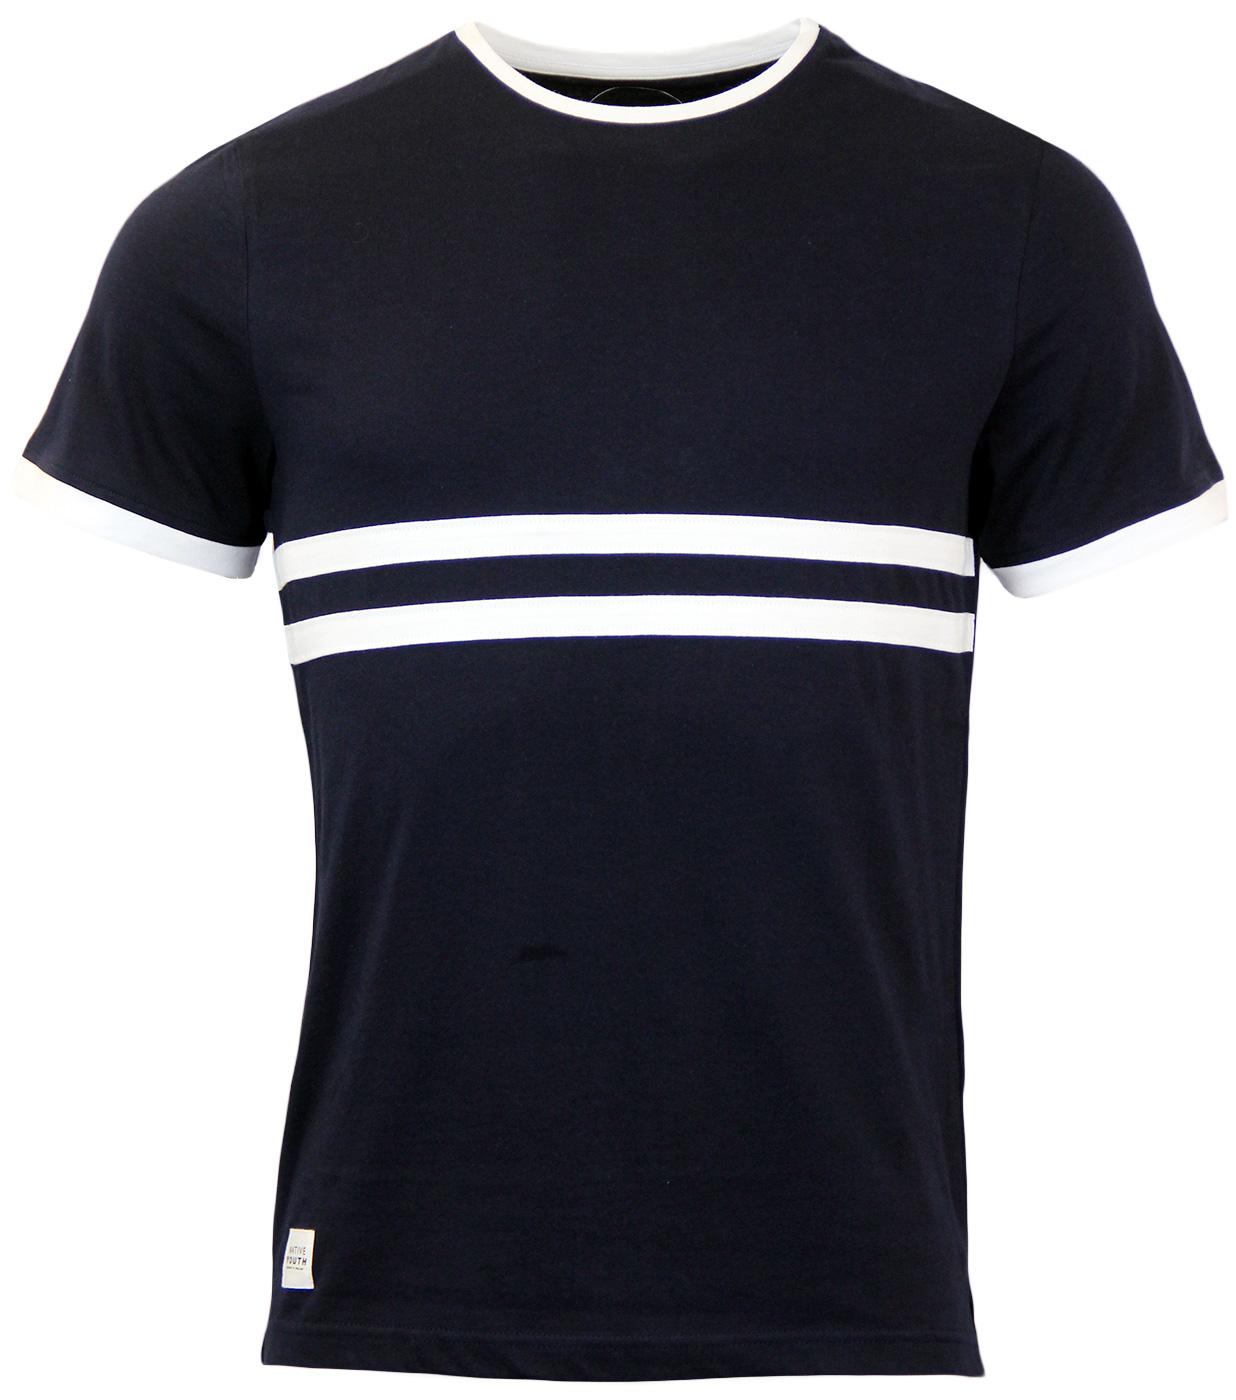 NATIVE YOUTH Retro Indie Twin Stripe Jersey Tee